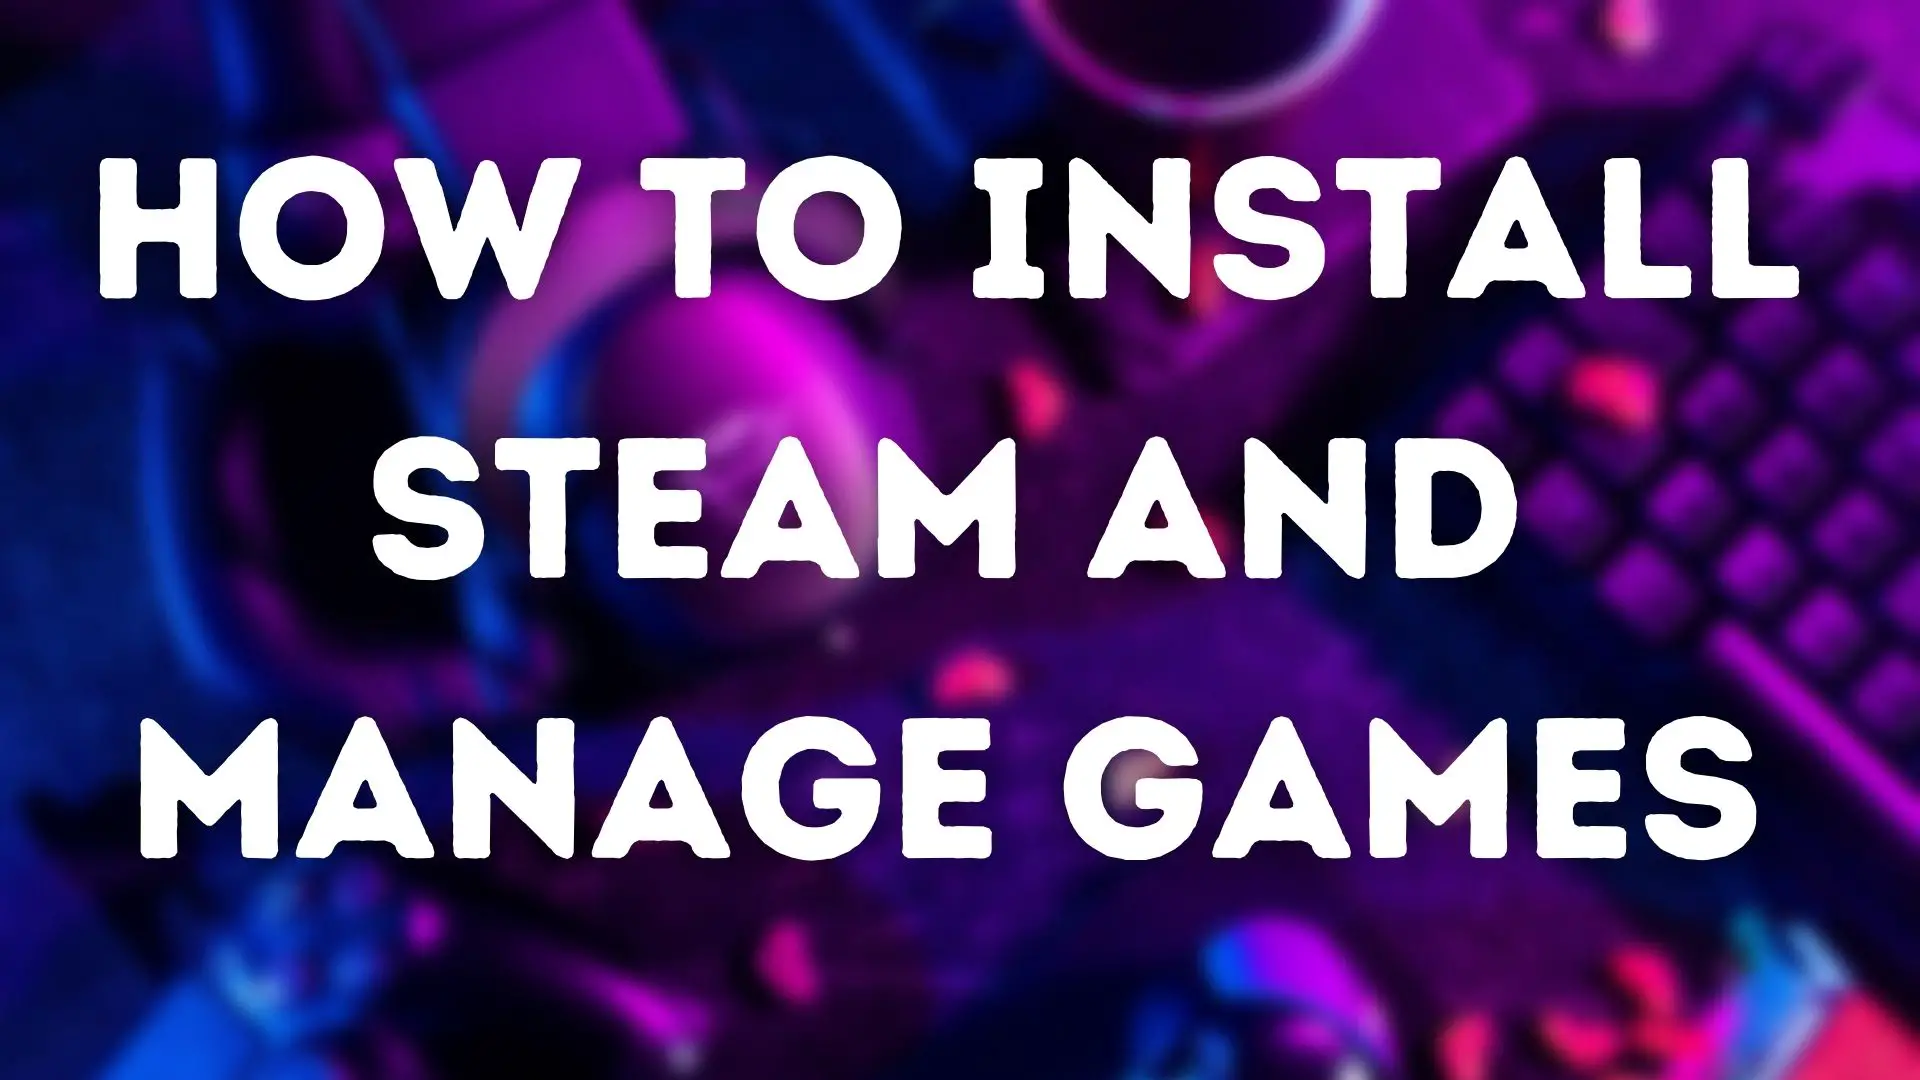 How to Install Steam and Manage Games